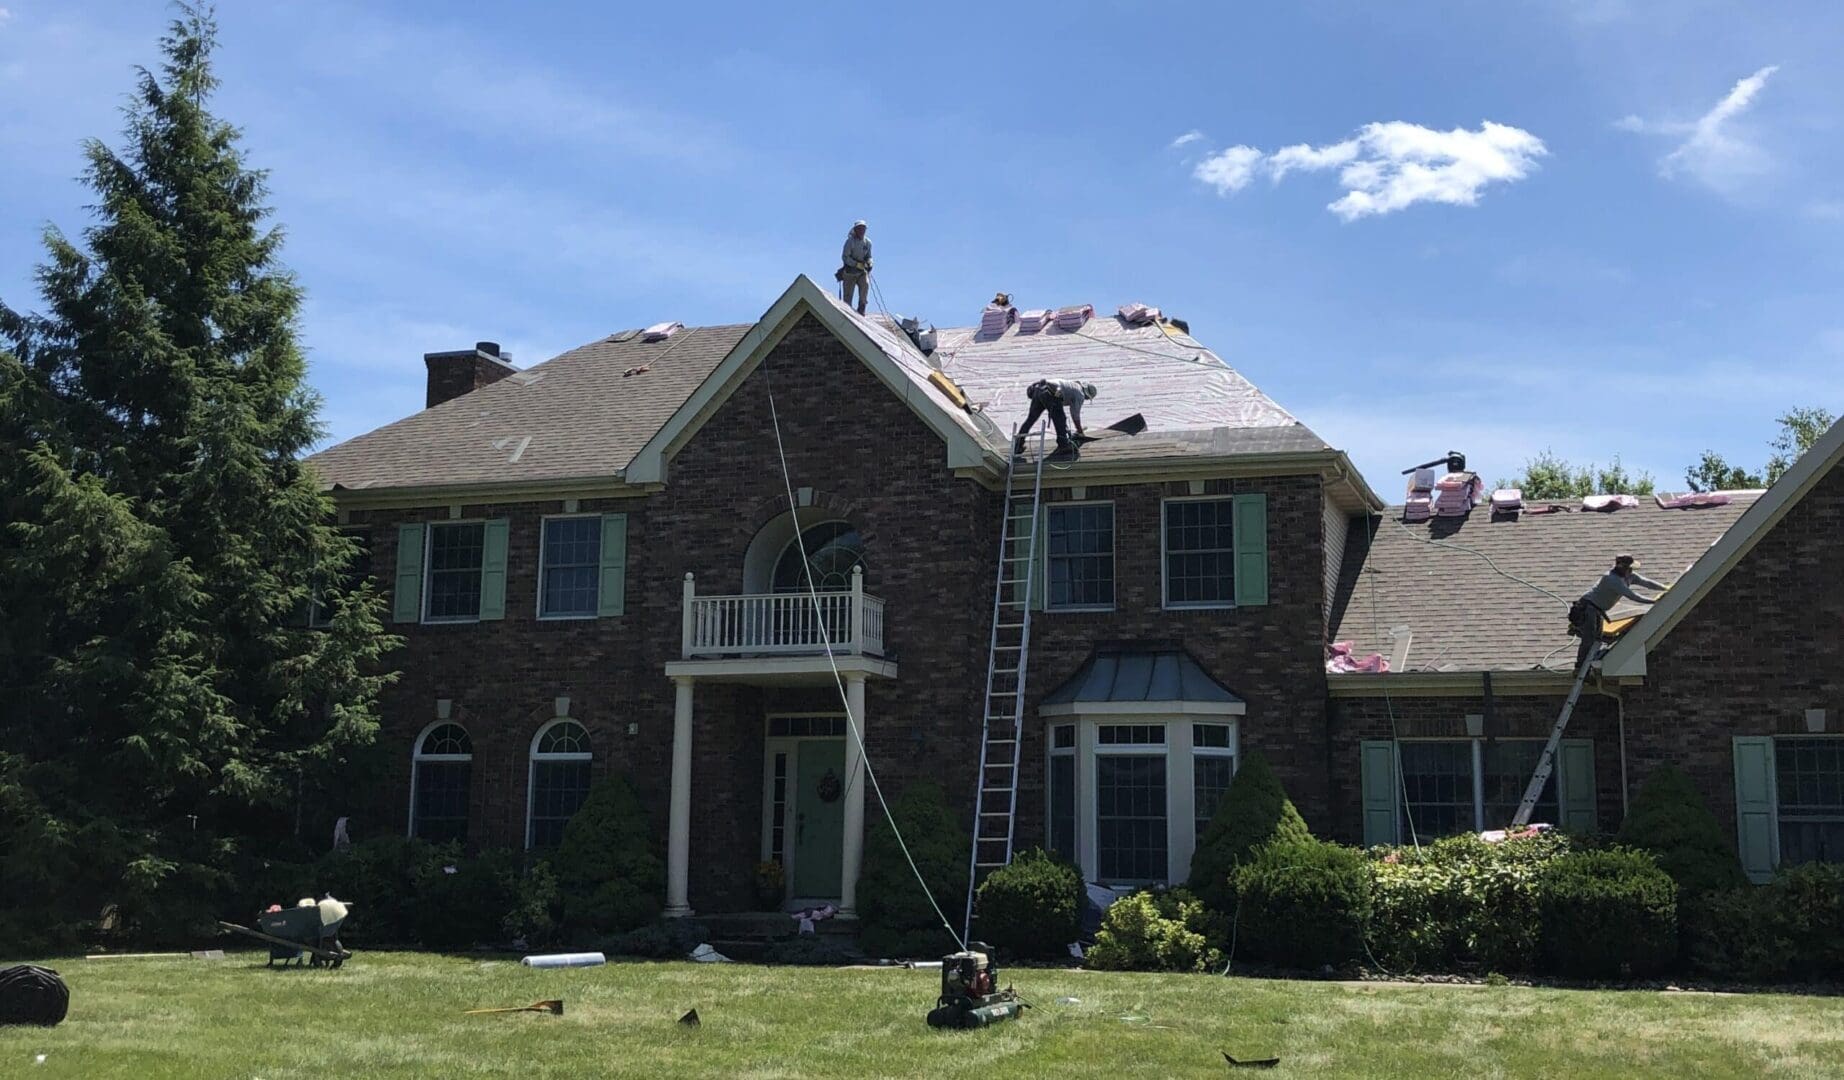 Exceptional Monroe NJ roofing experts